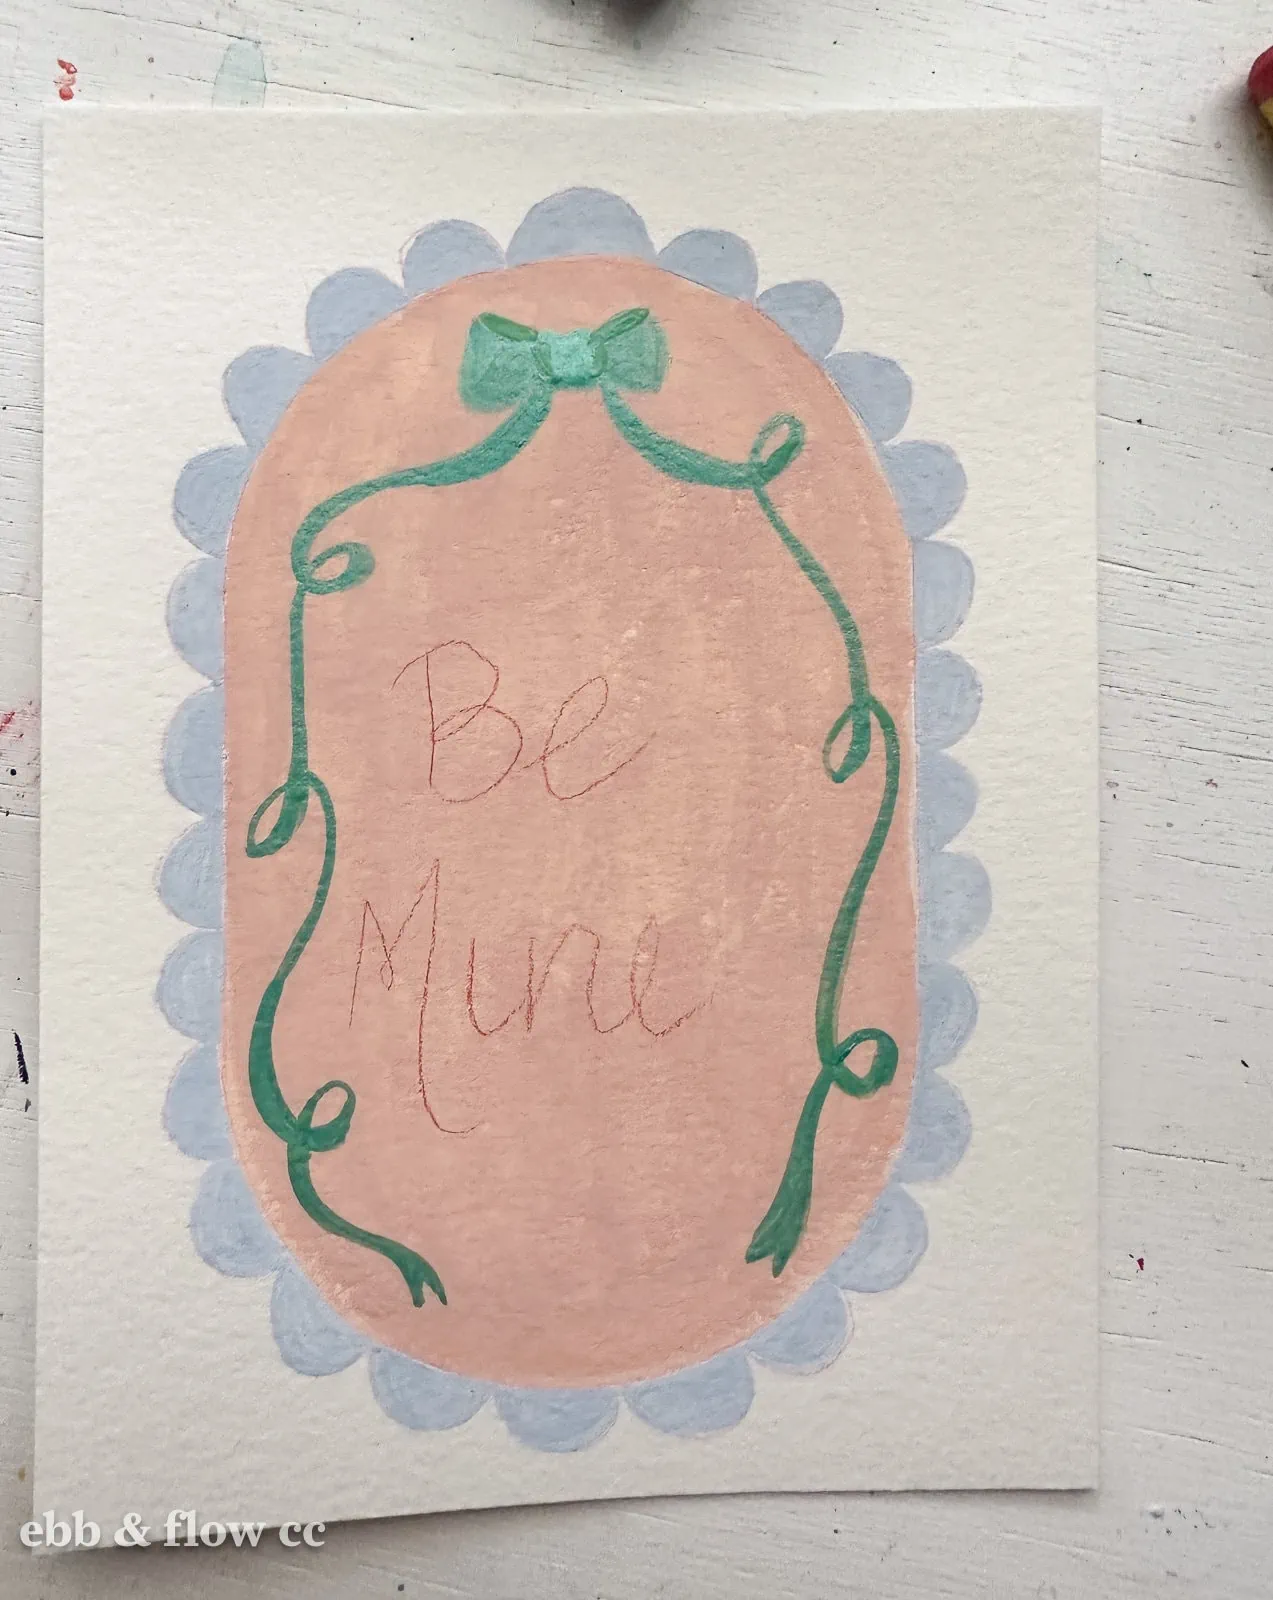 painted oval that says "Be Mine"